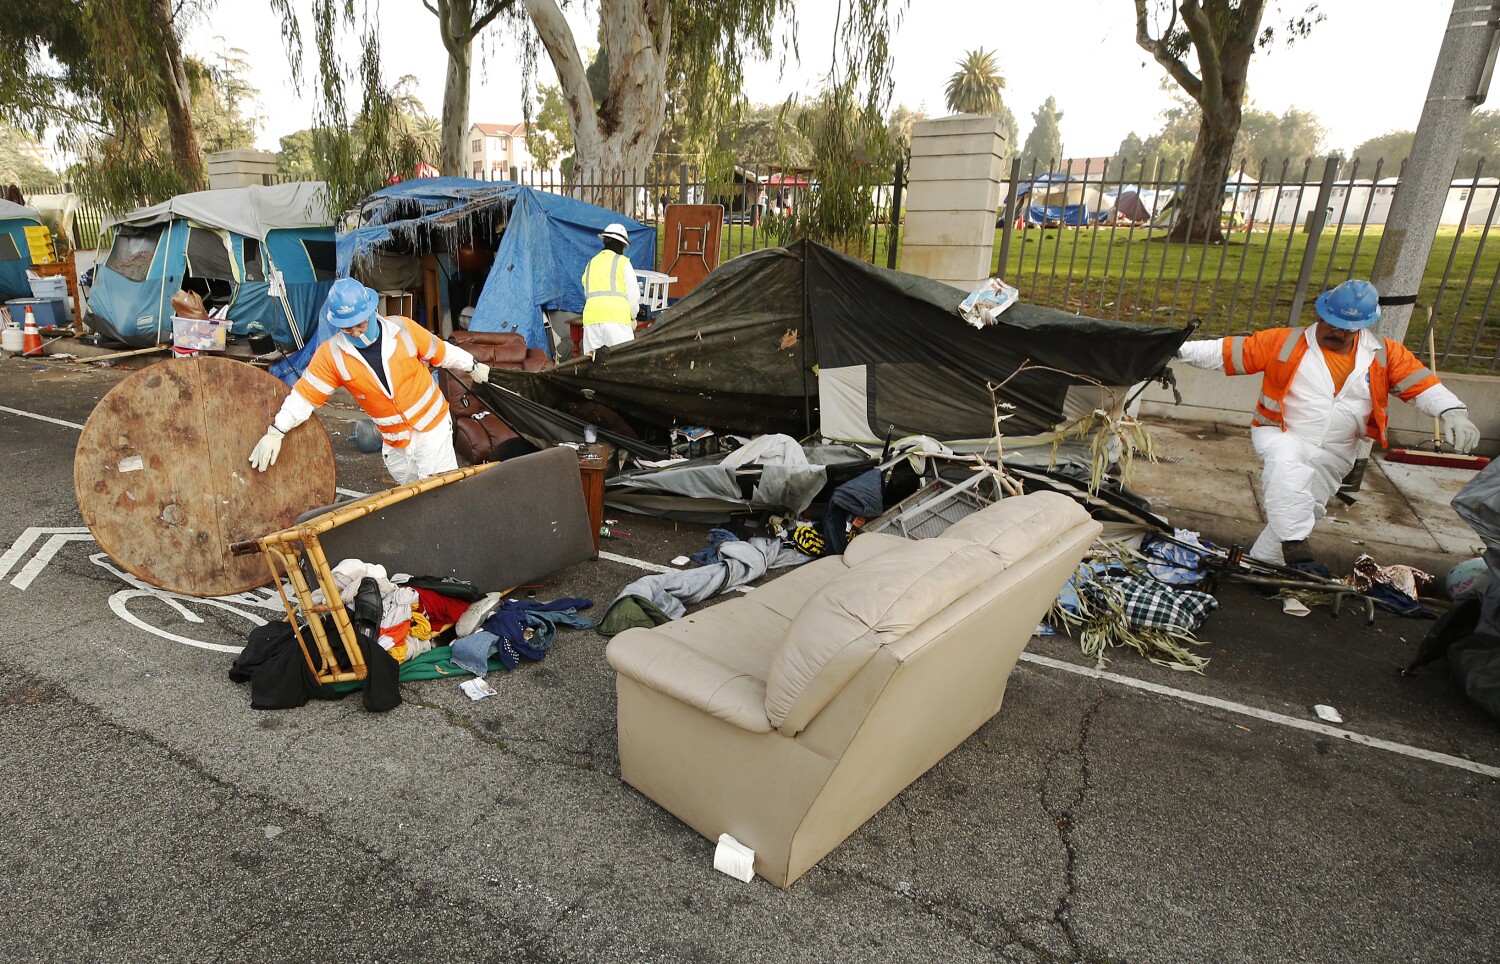 Photos: A homeless encampment is cleared in front of the West L.A. VA campus